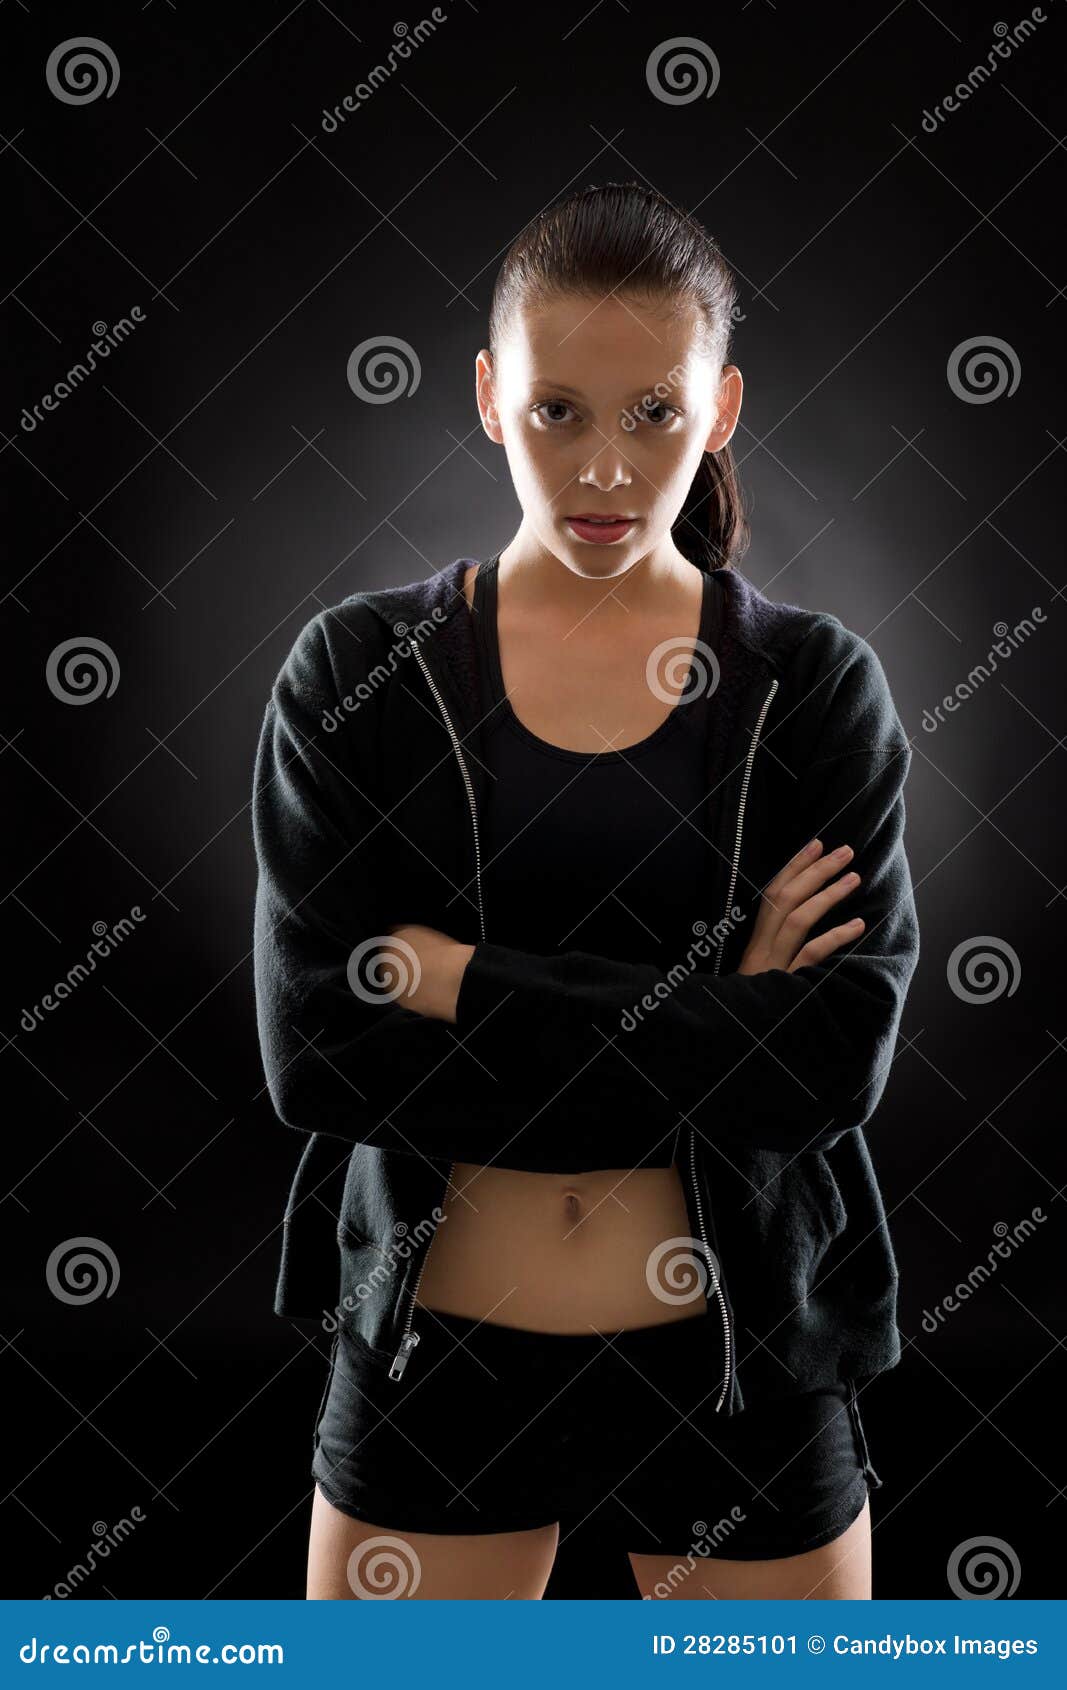 Black Fitness Woman Sport Young Posing Portrait Stock Image - Image ...